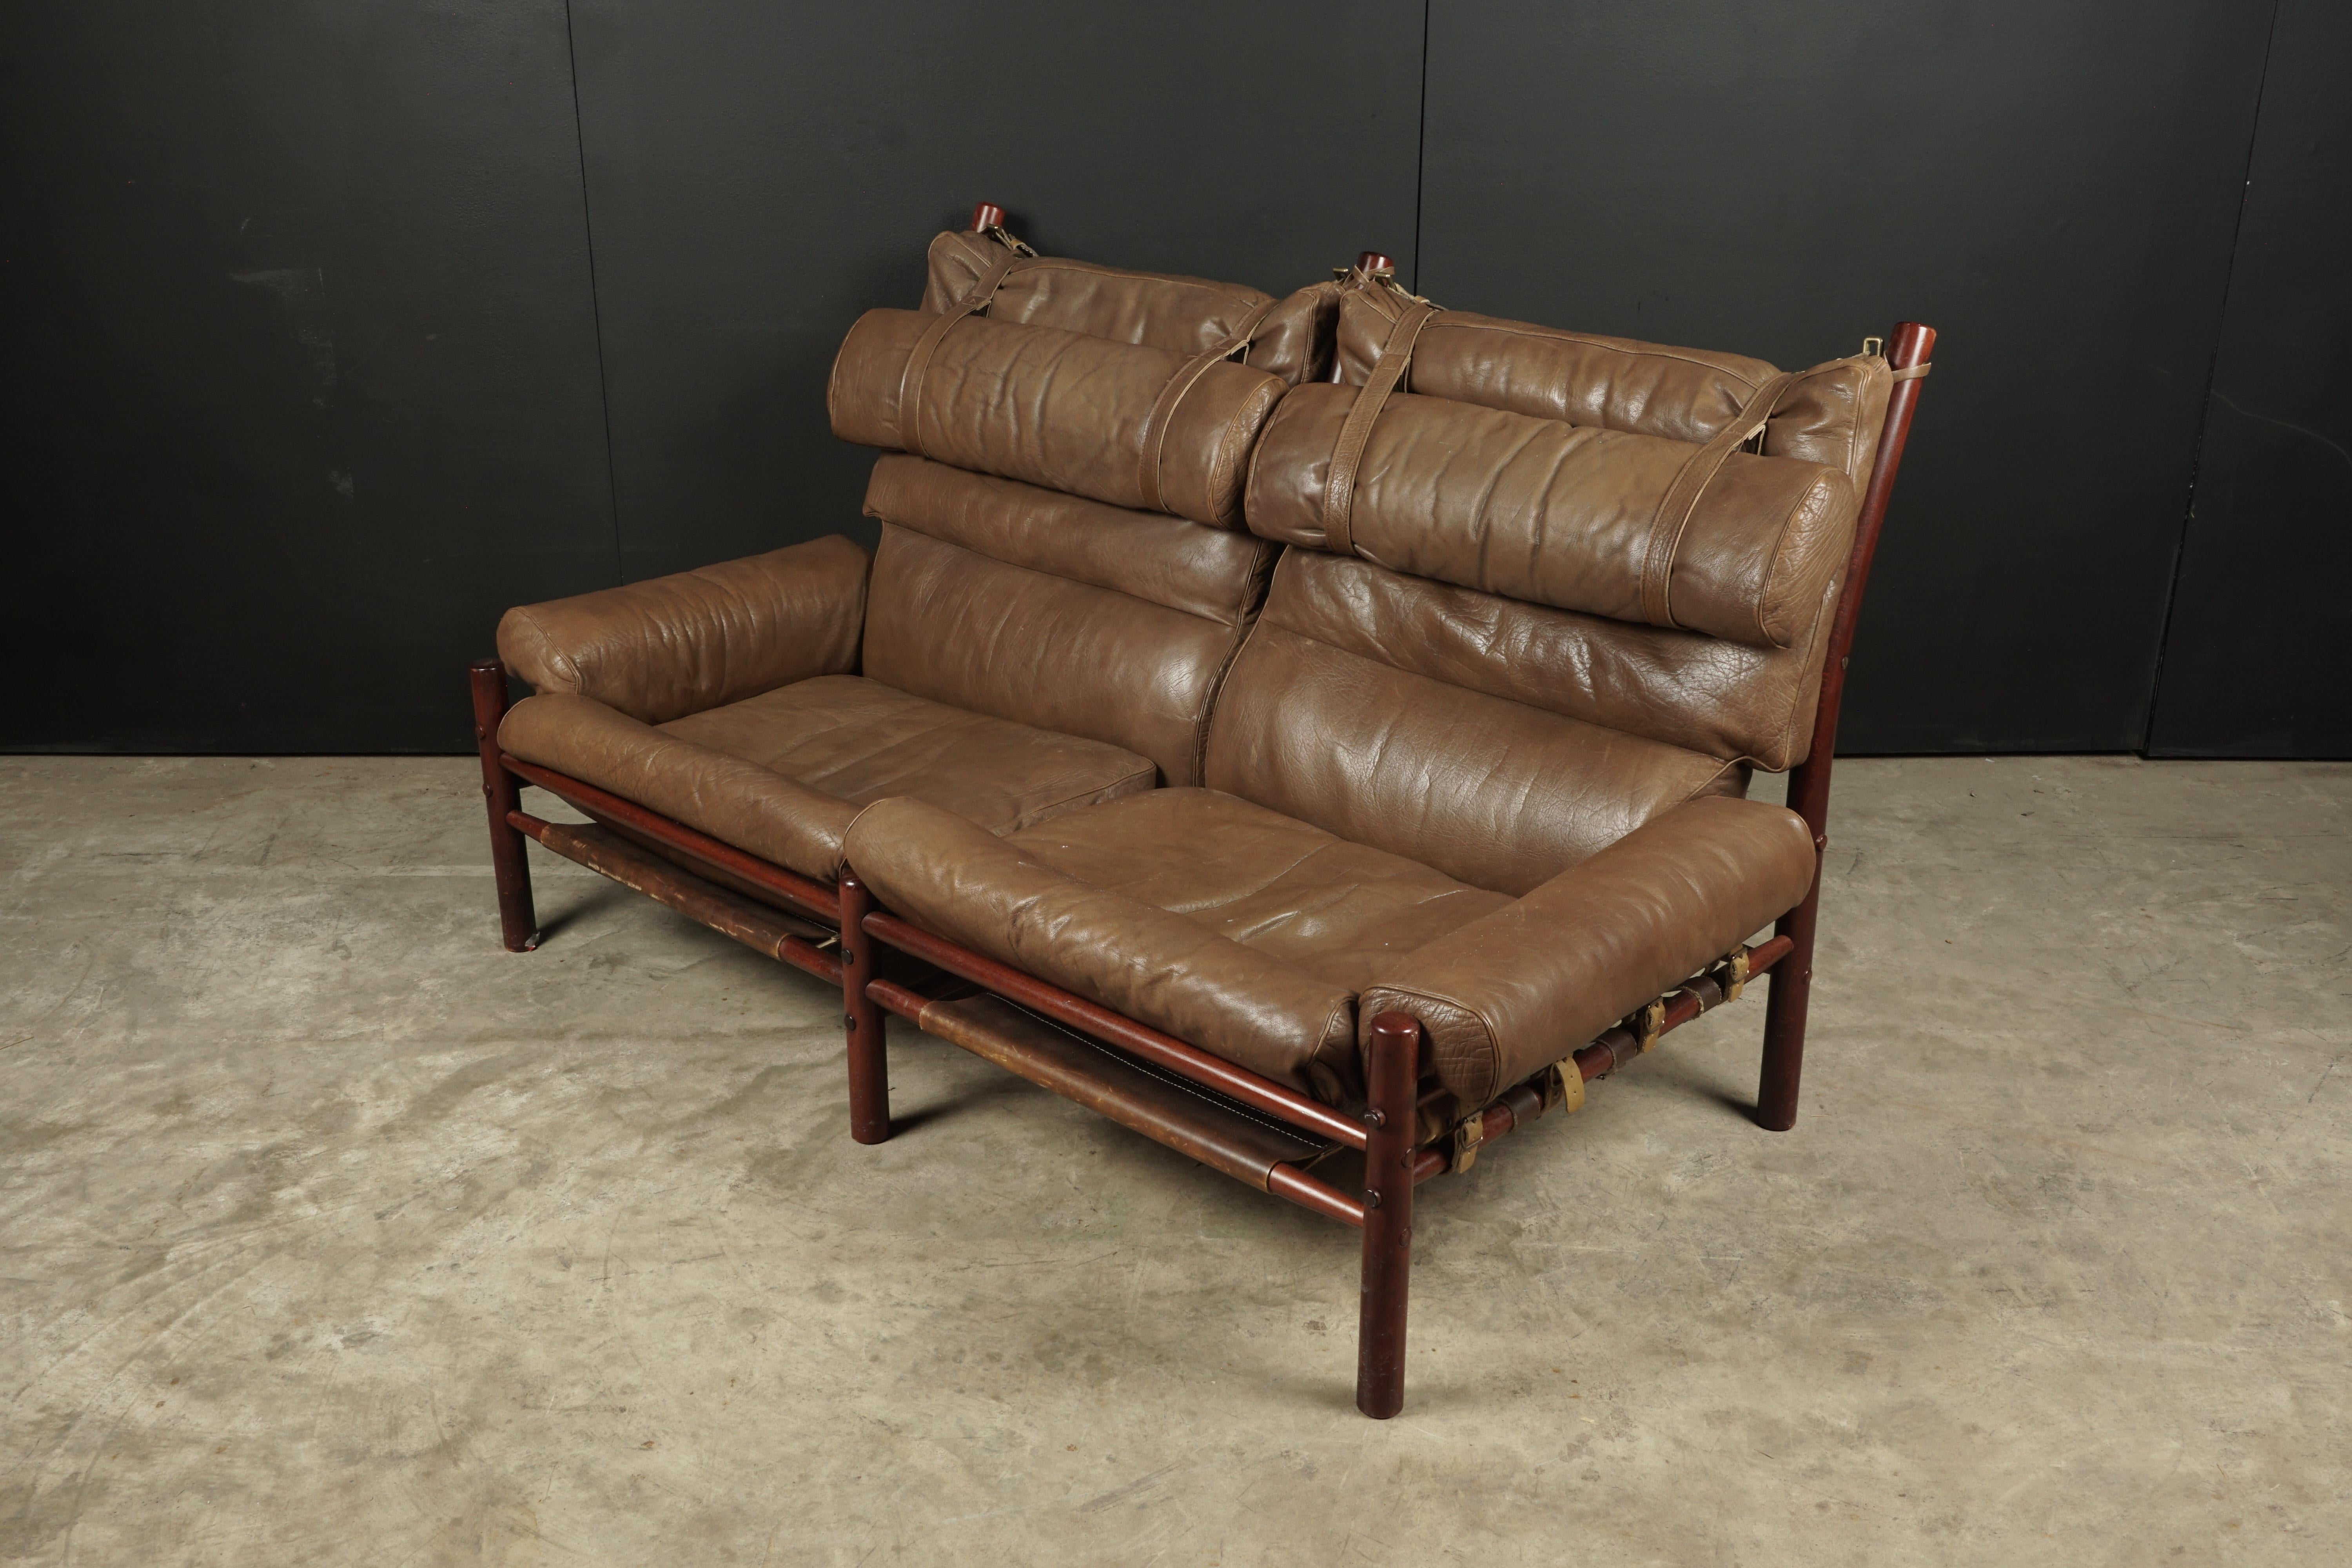 Midcentury sofa designed by Arne Norell, model Inca, circa 1970. Original thick brown leather with patina on a solid birch frame. Manufactured by Arne Norell AB, Aneby Sweden.